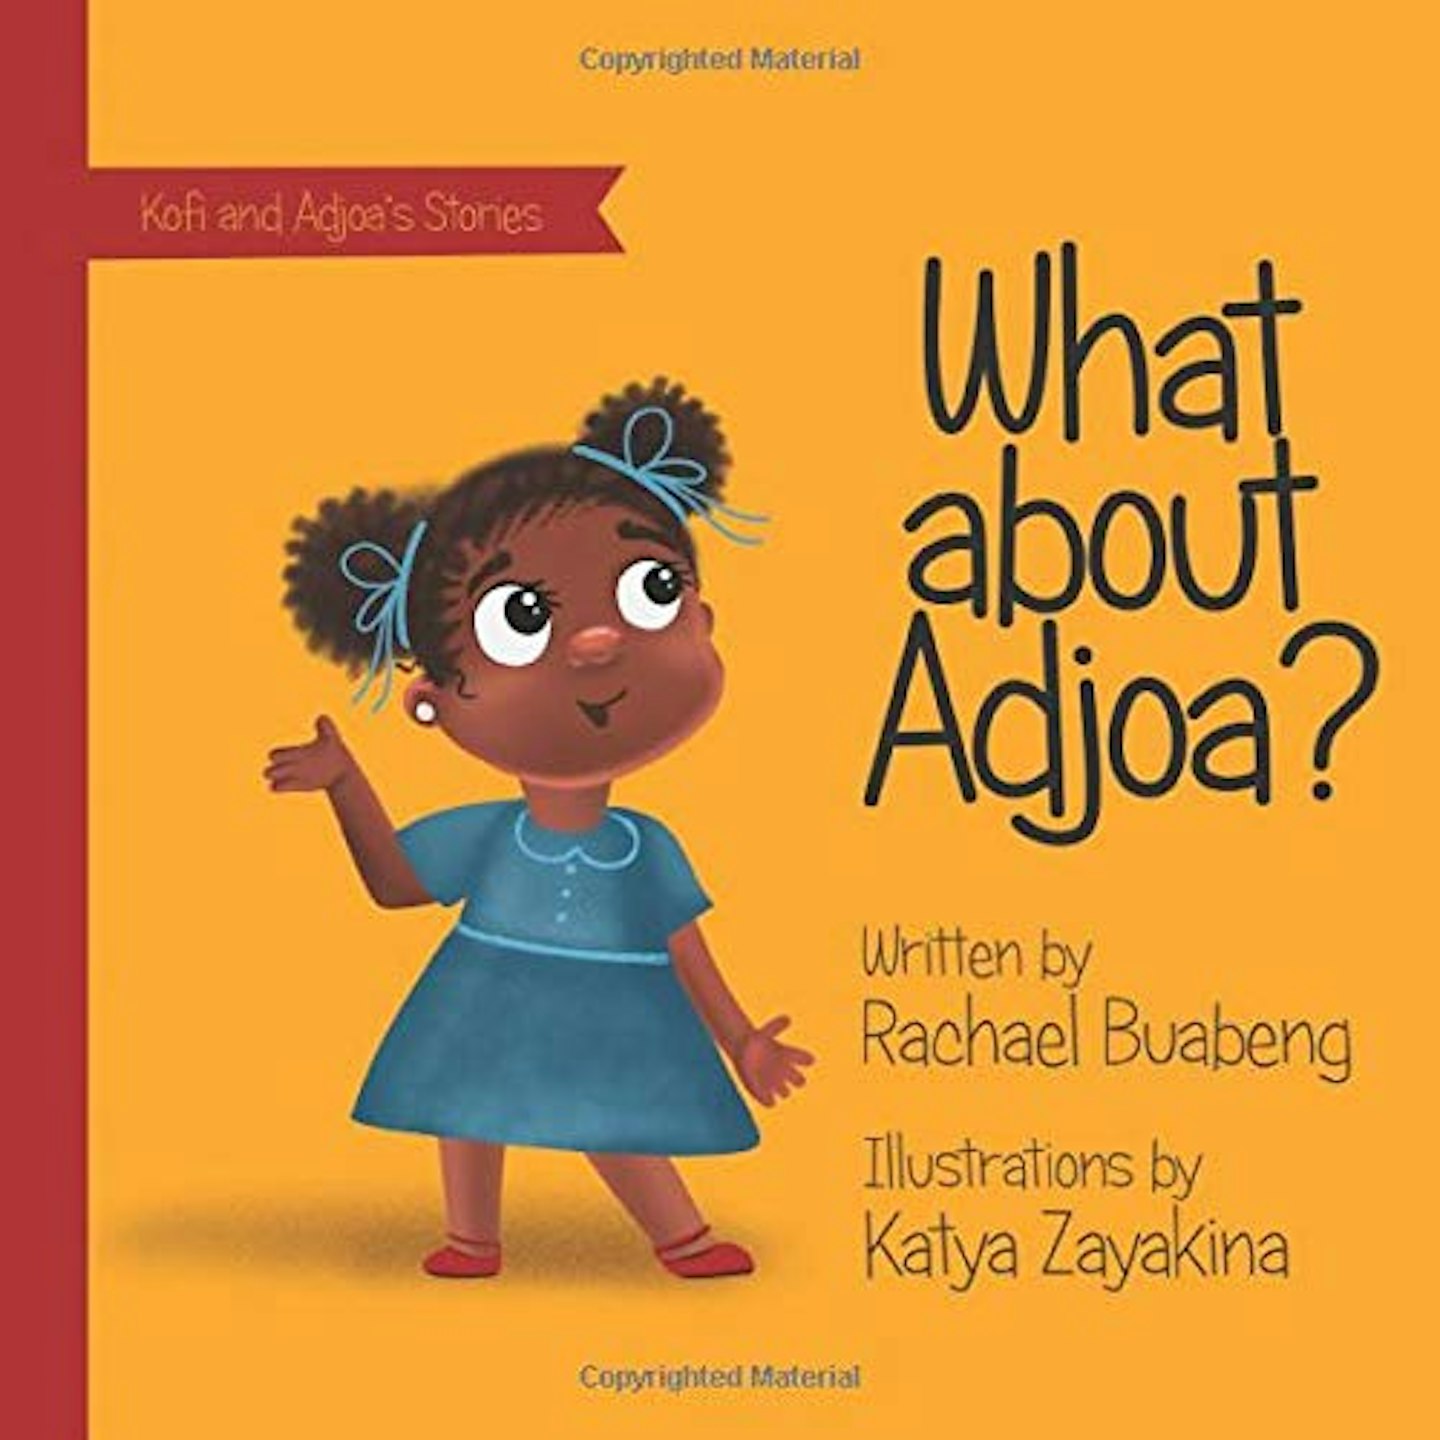 What About Adjoa by Rachael Buabeng